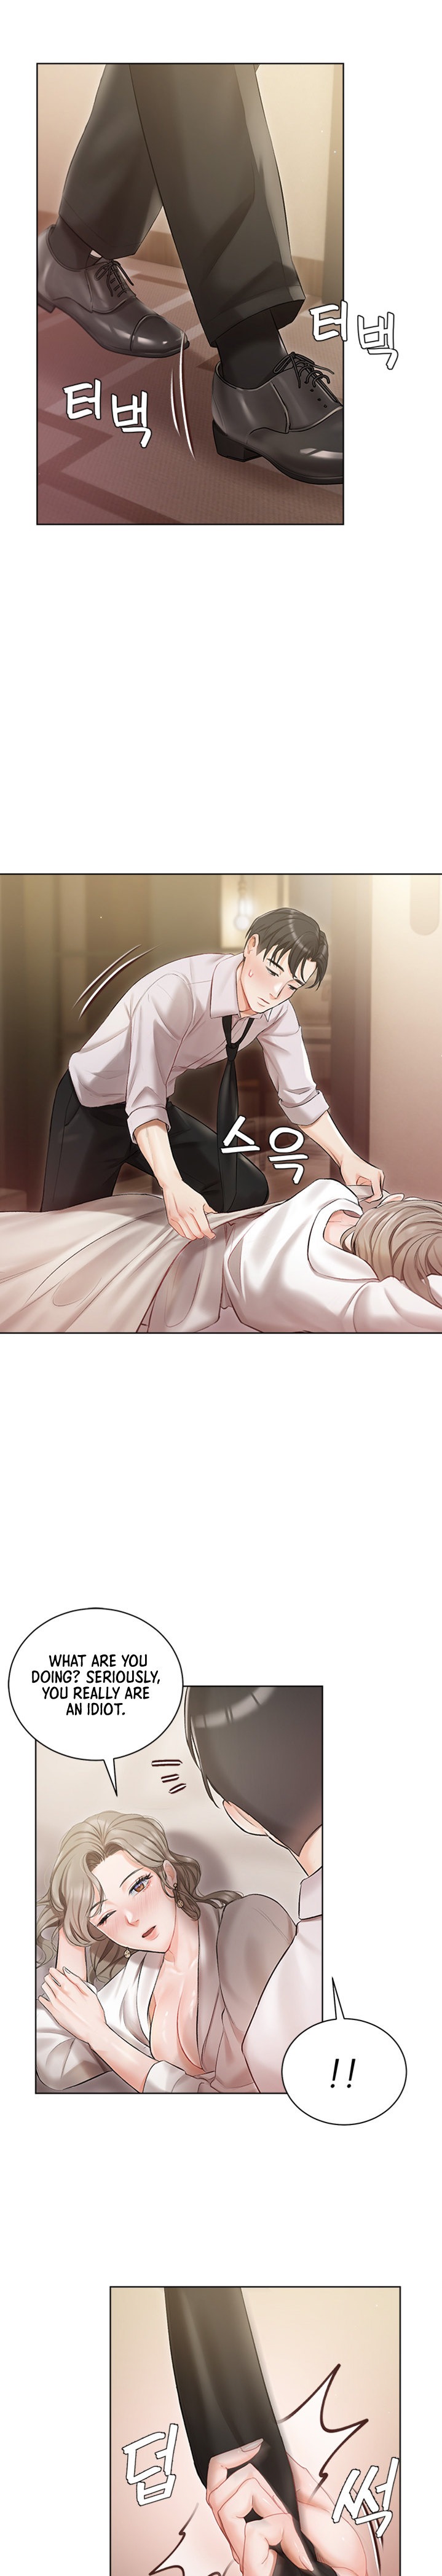 Hyeonjung’s Residence - Chapter 2 Page 28